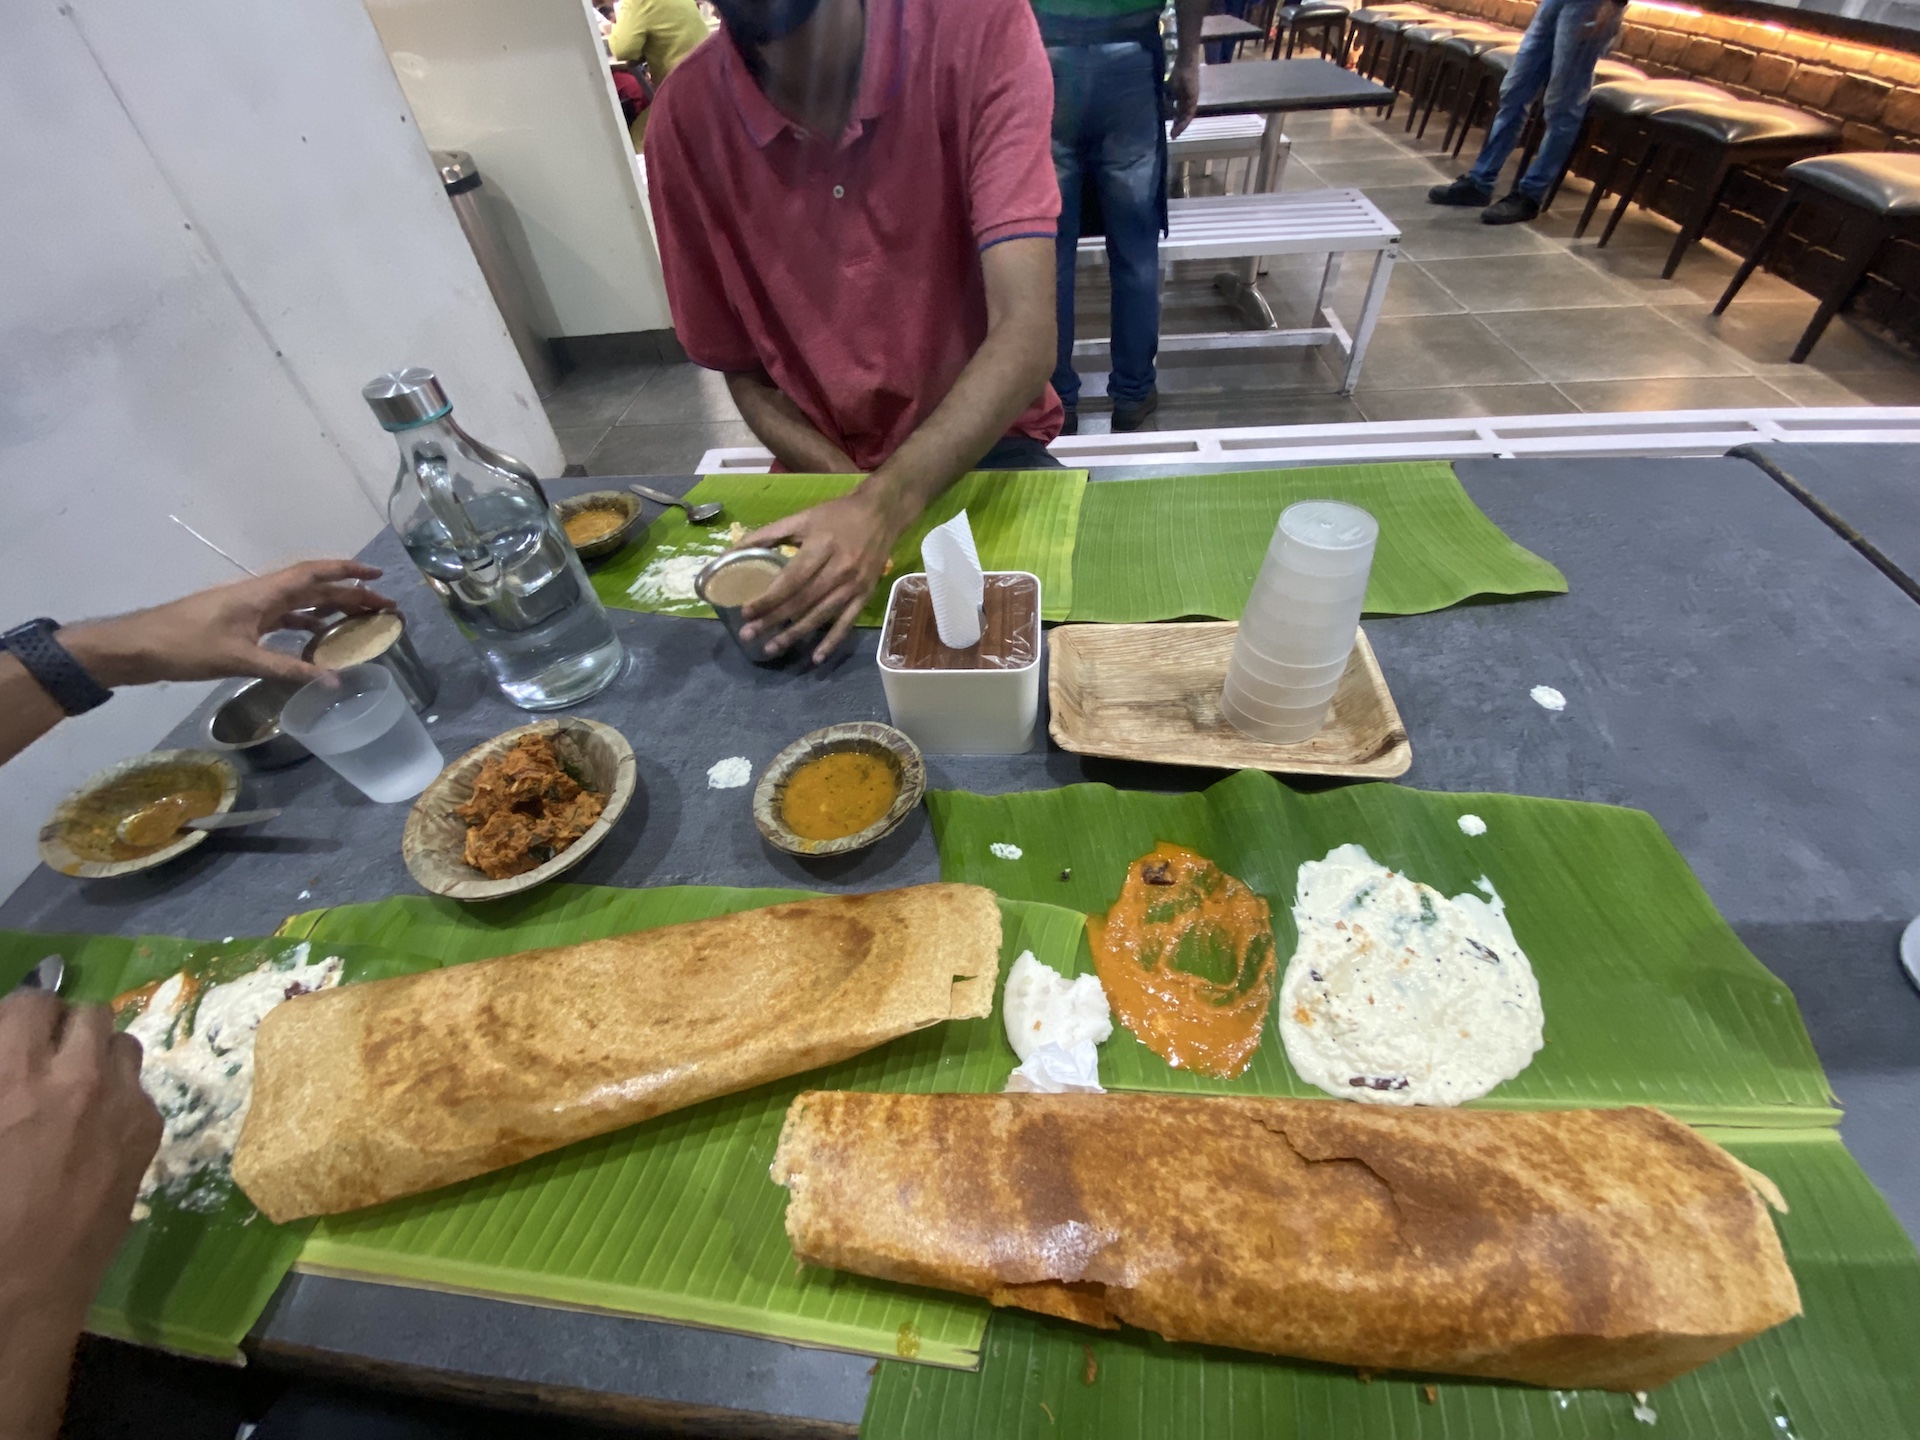 Eating first meal in India